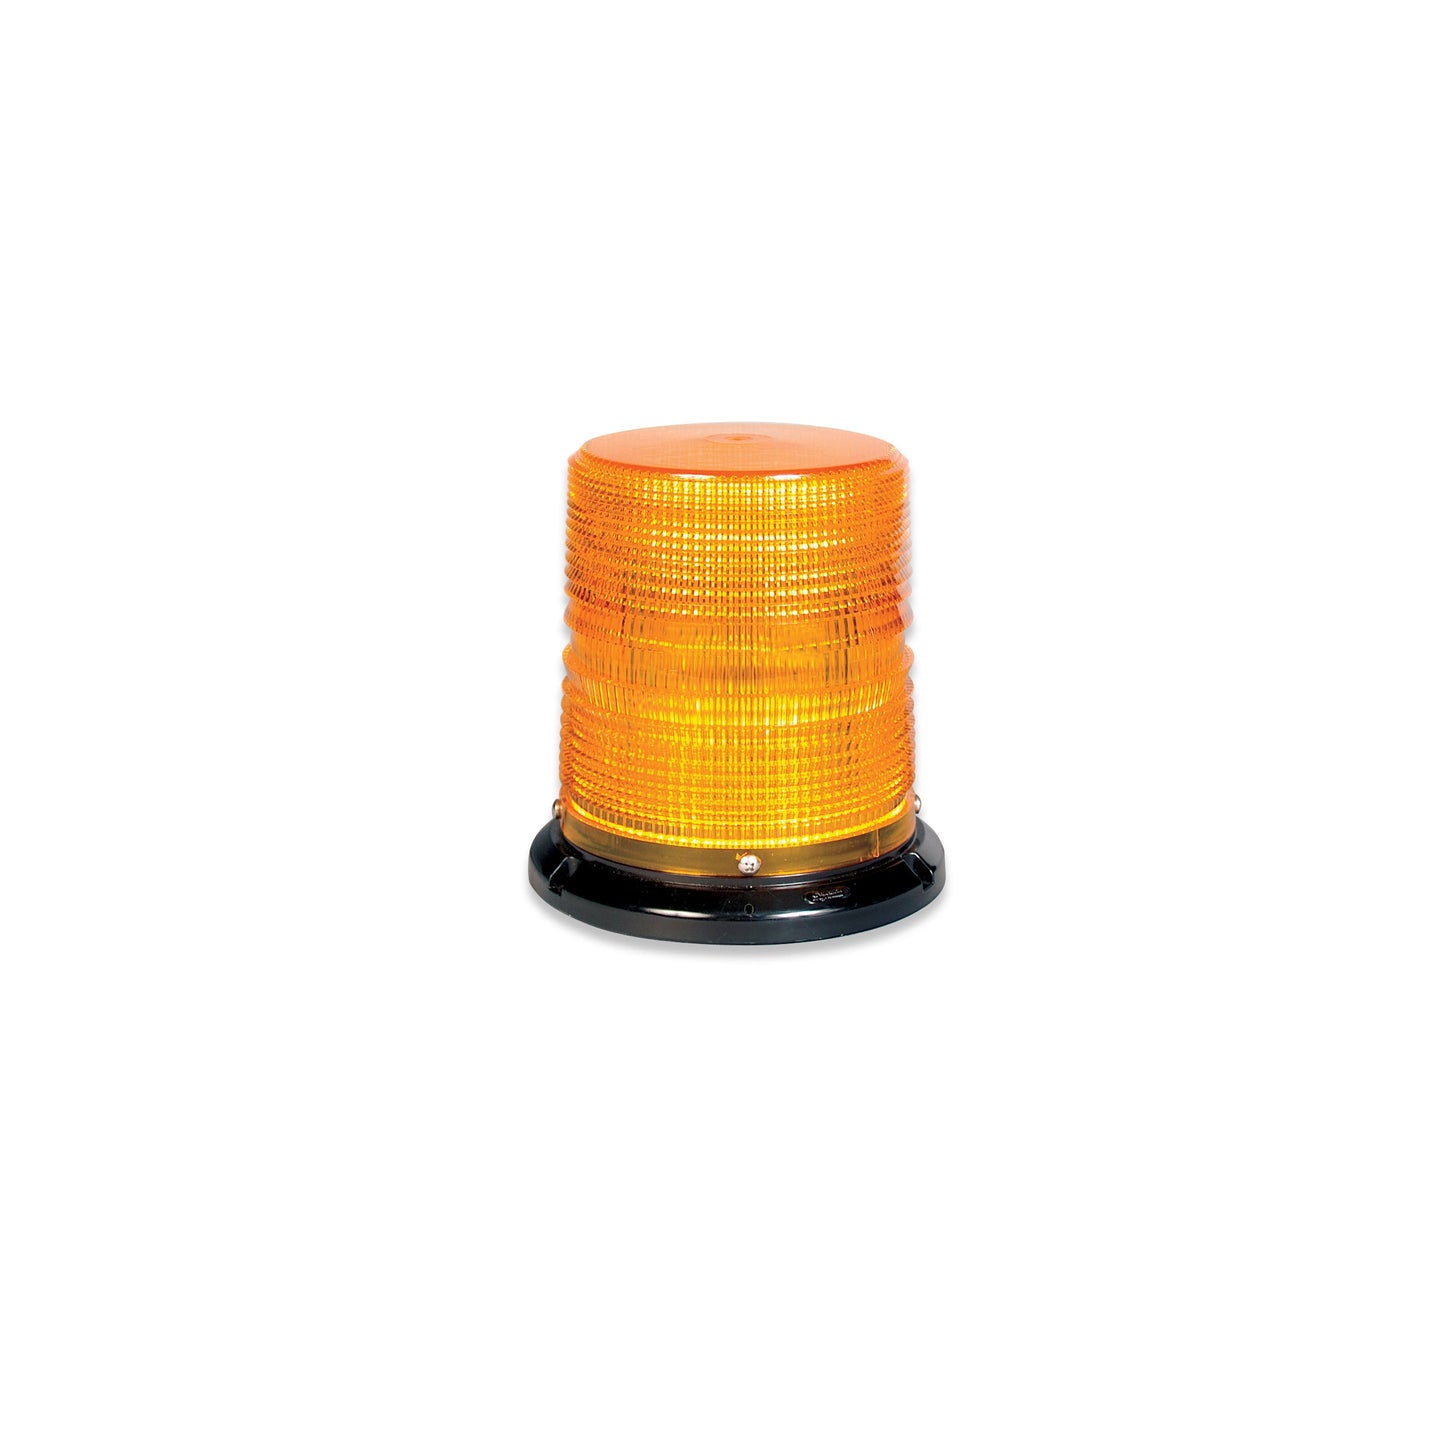 Soundoff Signal ELB45BCH0FC 4500 Series Led Beacon, 10-30V, Sae J845 Class 1 - Flat/Pipe Mount, 4" Clear Dome & Amber/White Leds